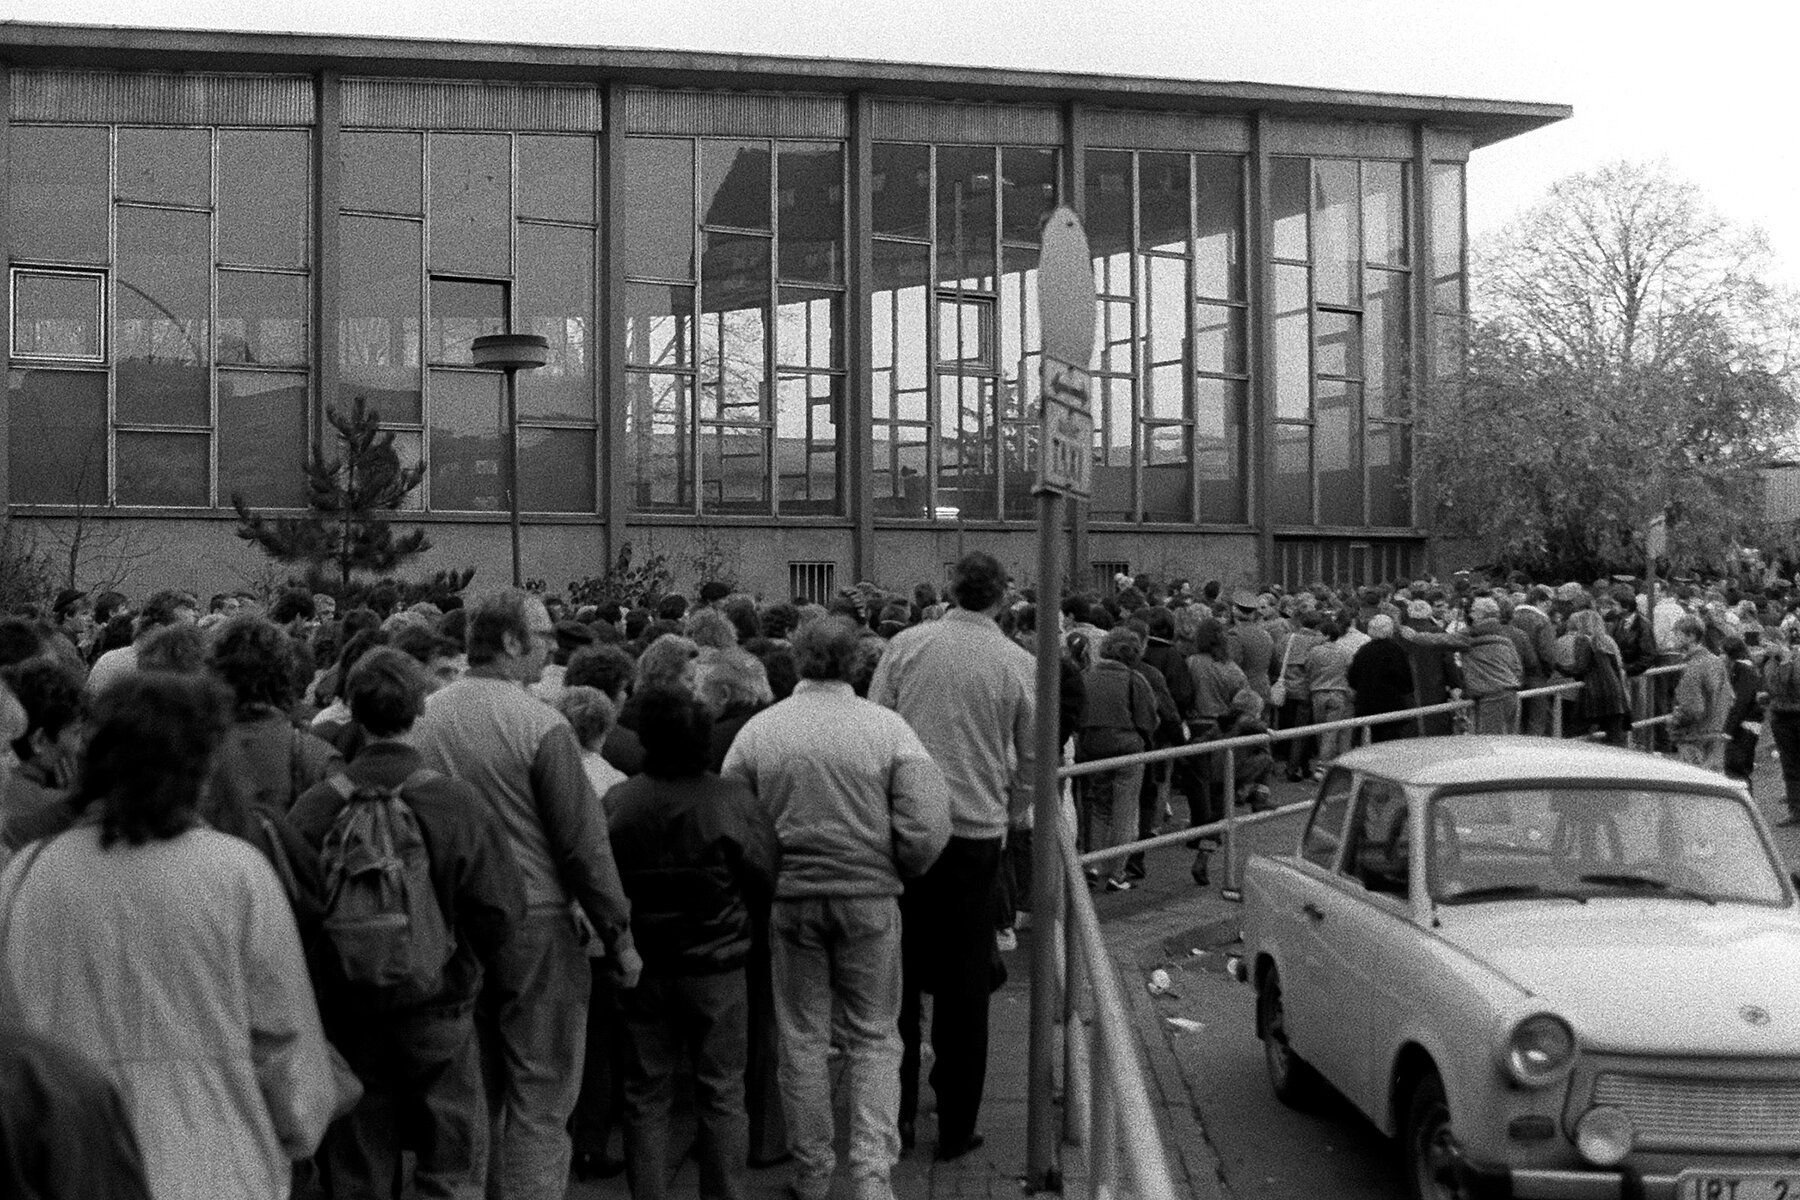 Crowds of people in front of the Tränenpalast, on the right is a Trabi.